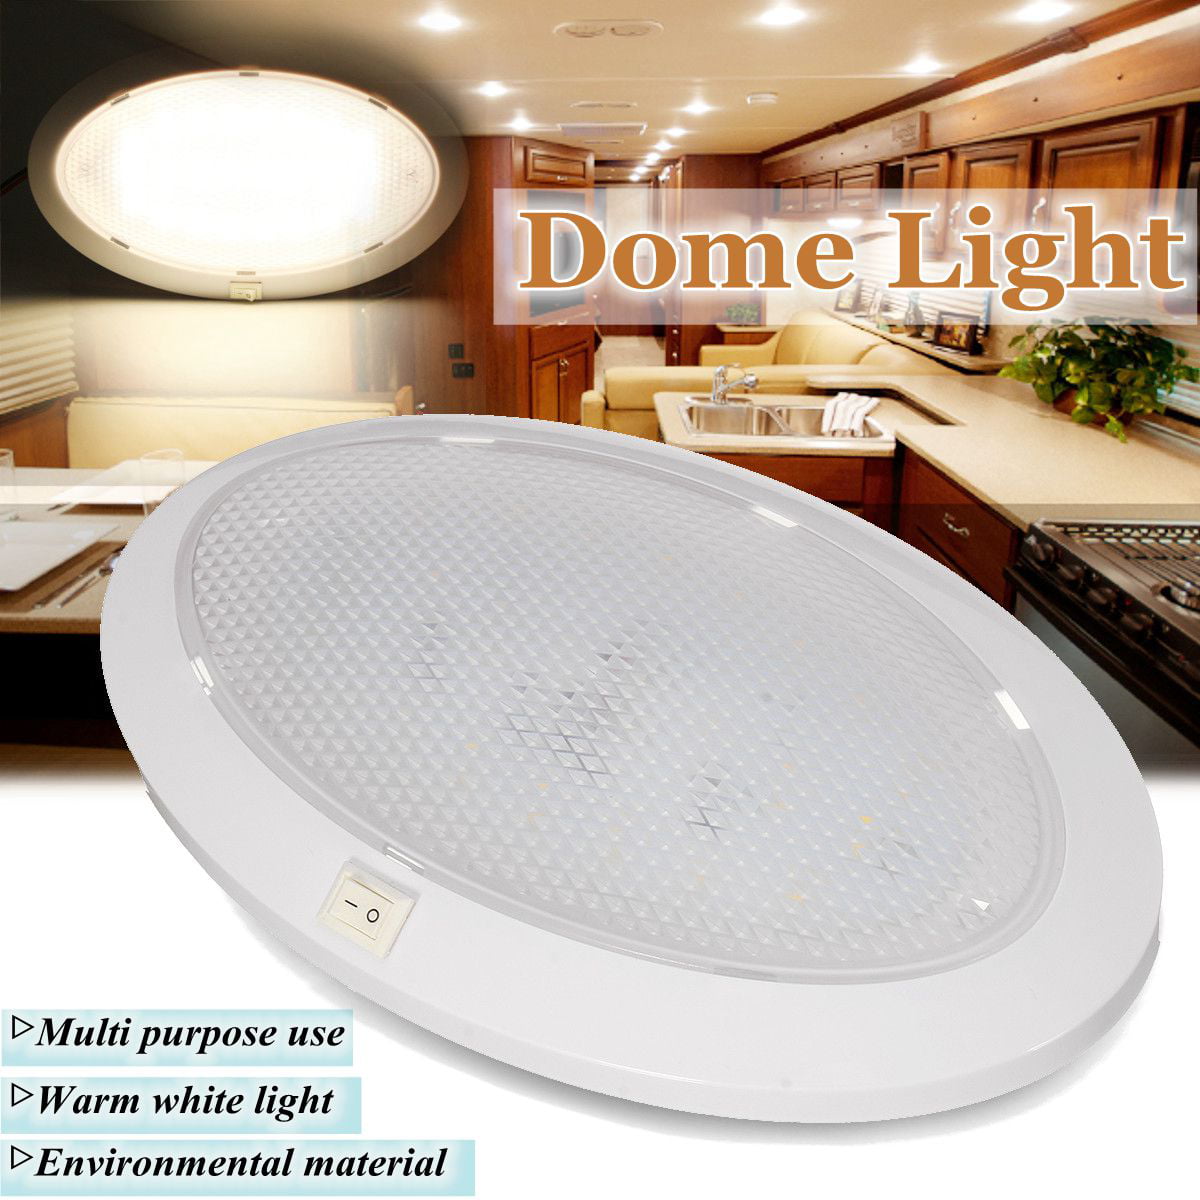 MagiDeal DC 12V LED Dome Interior Stainless Round Ceiling Light Boat RV